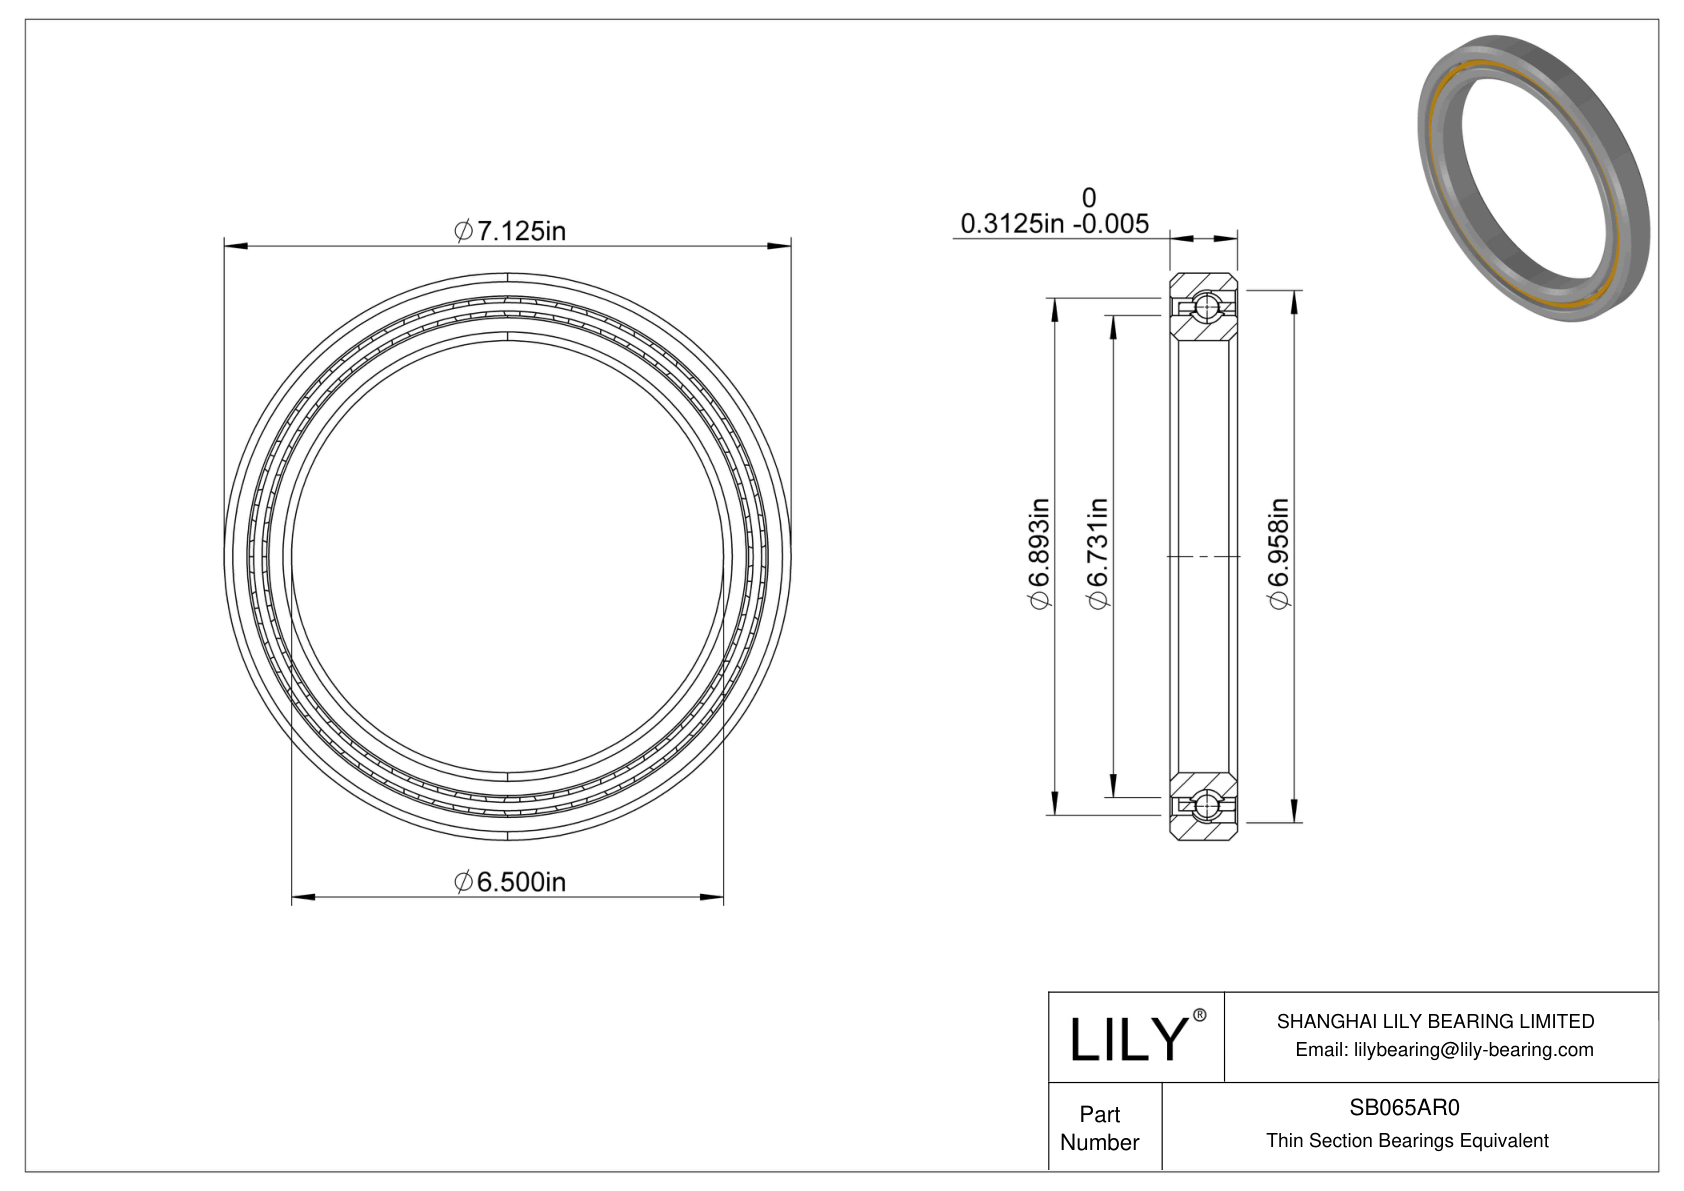 SB065AR0 Constant Section (CS) Bearings cad drawing